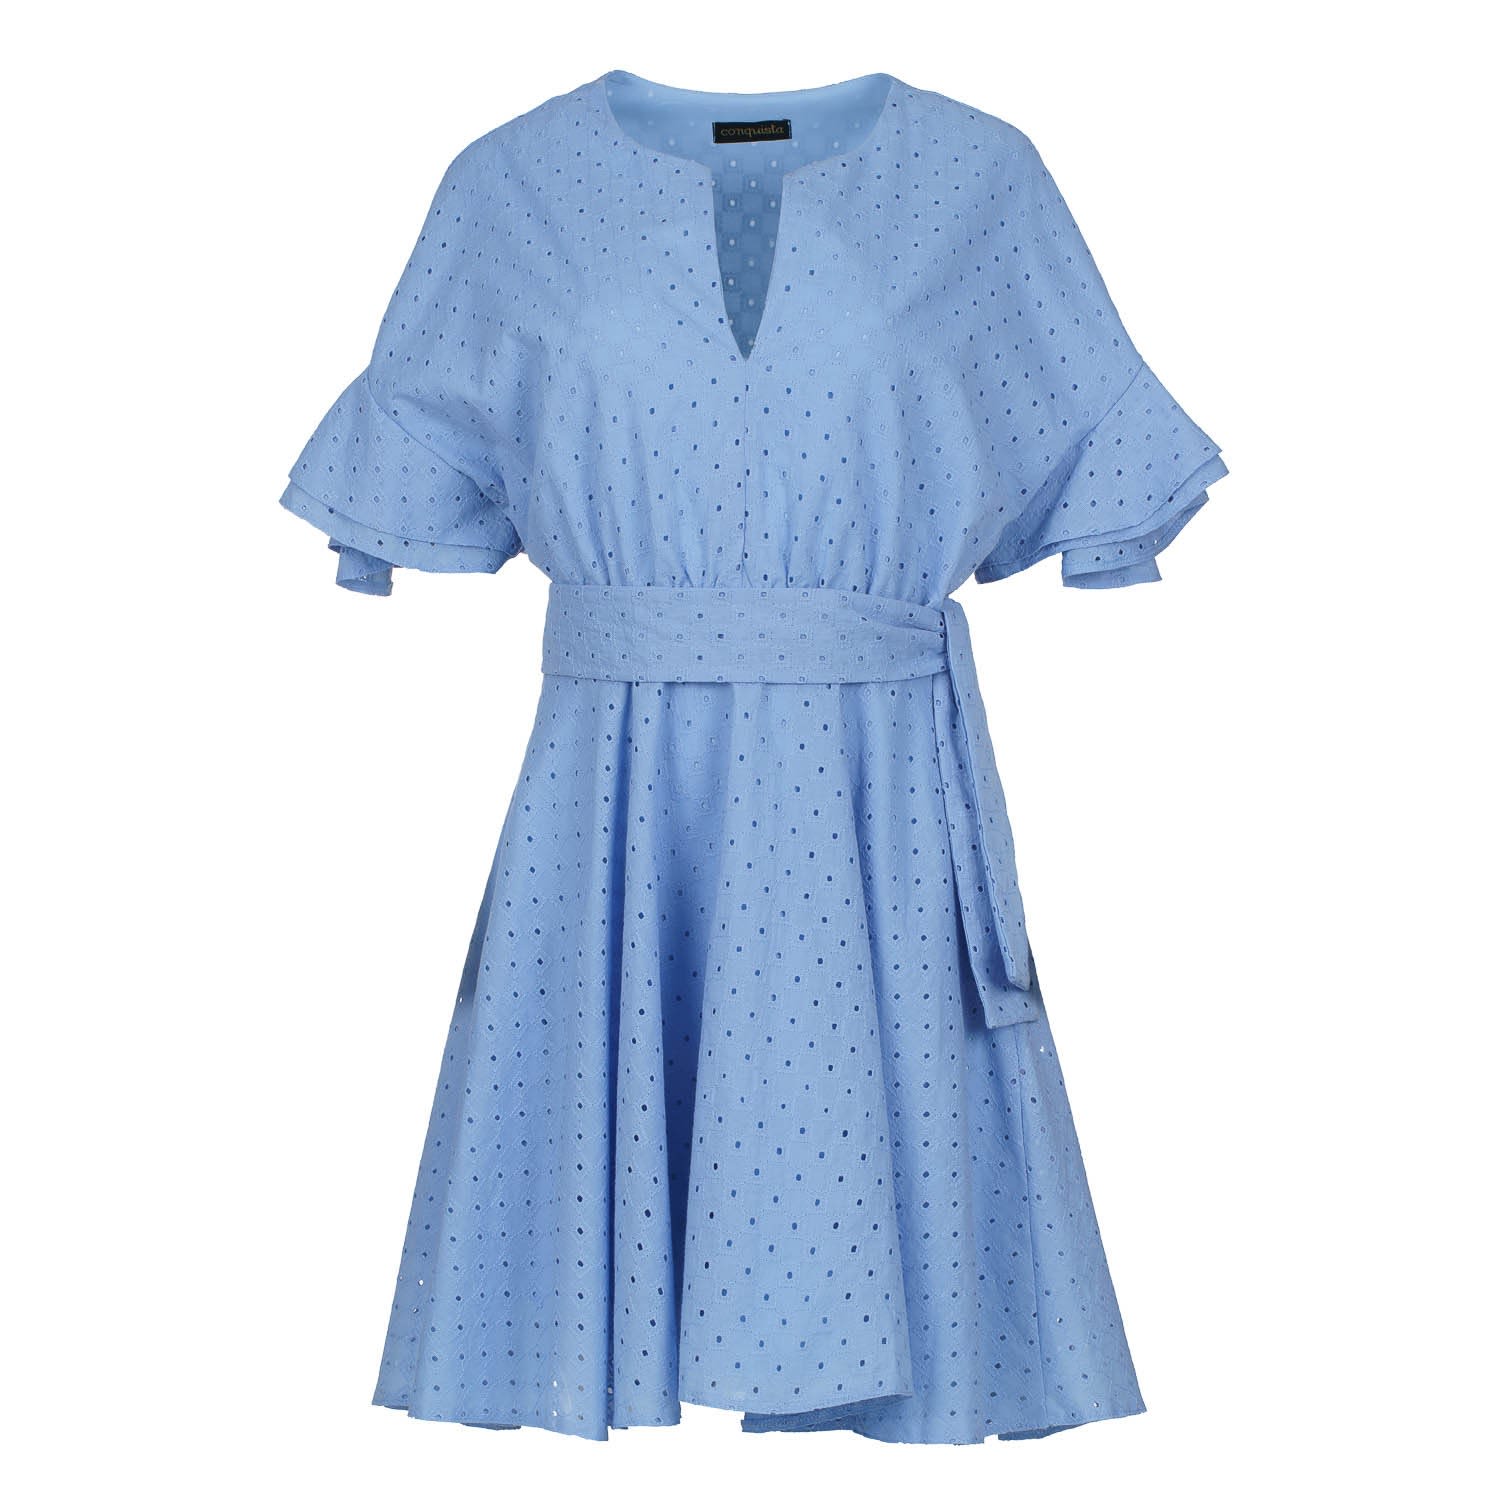 Women’s Sky Blue Embroidered Dress With Ruffle Sleeves Small Conquista